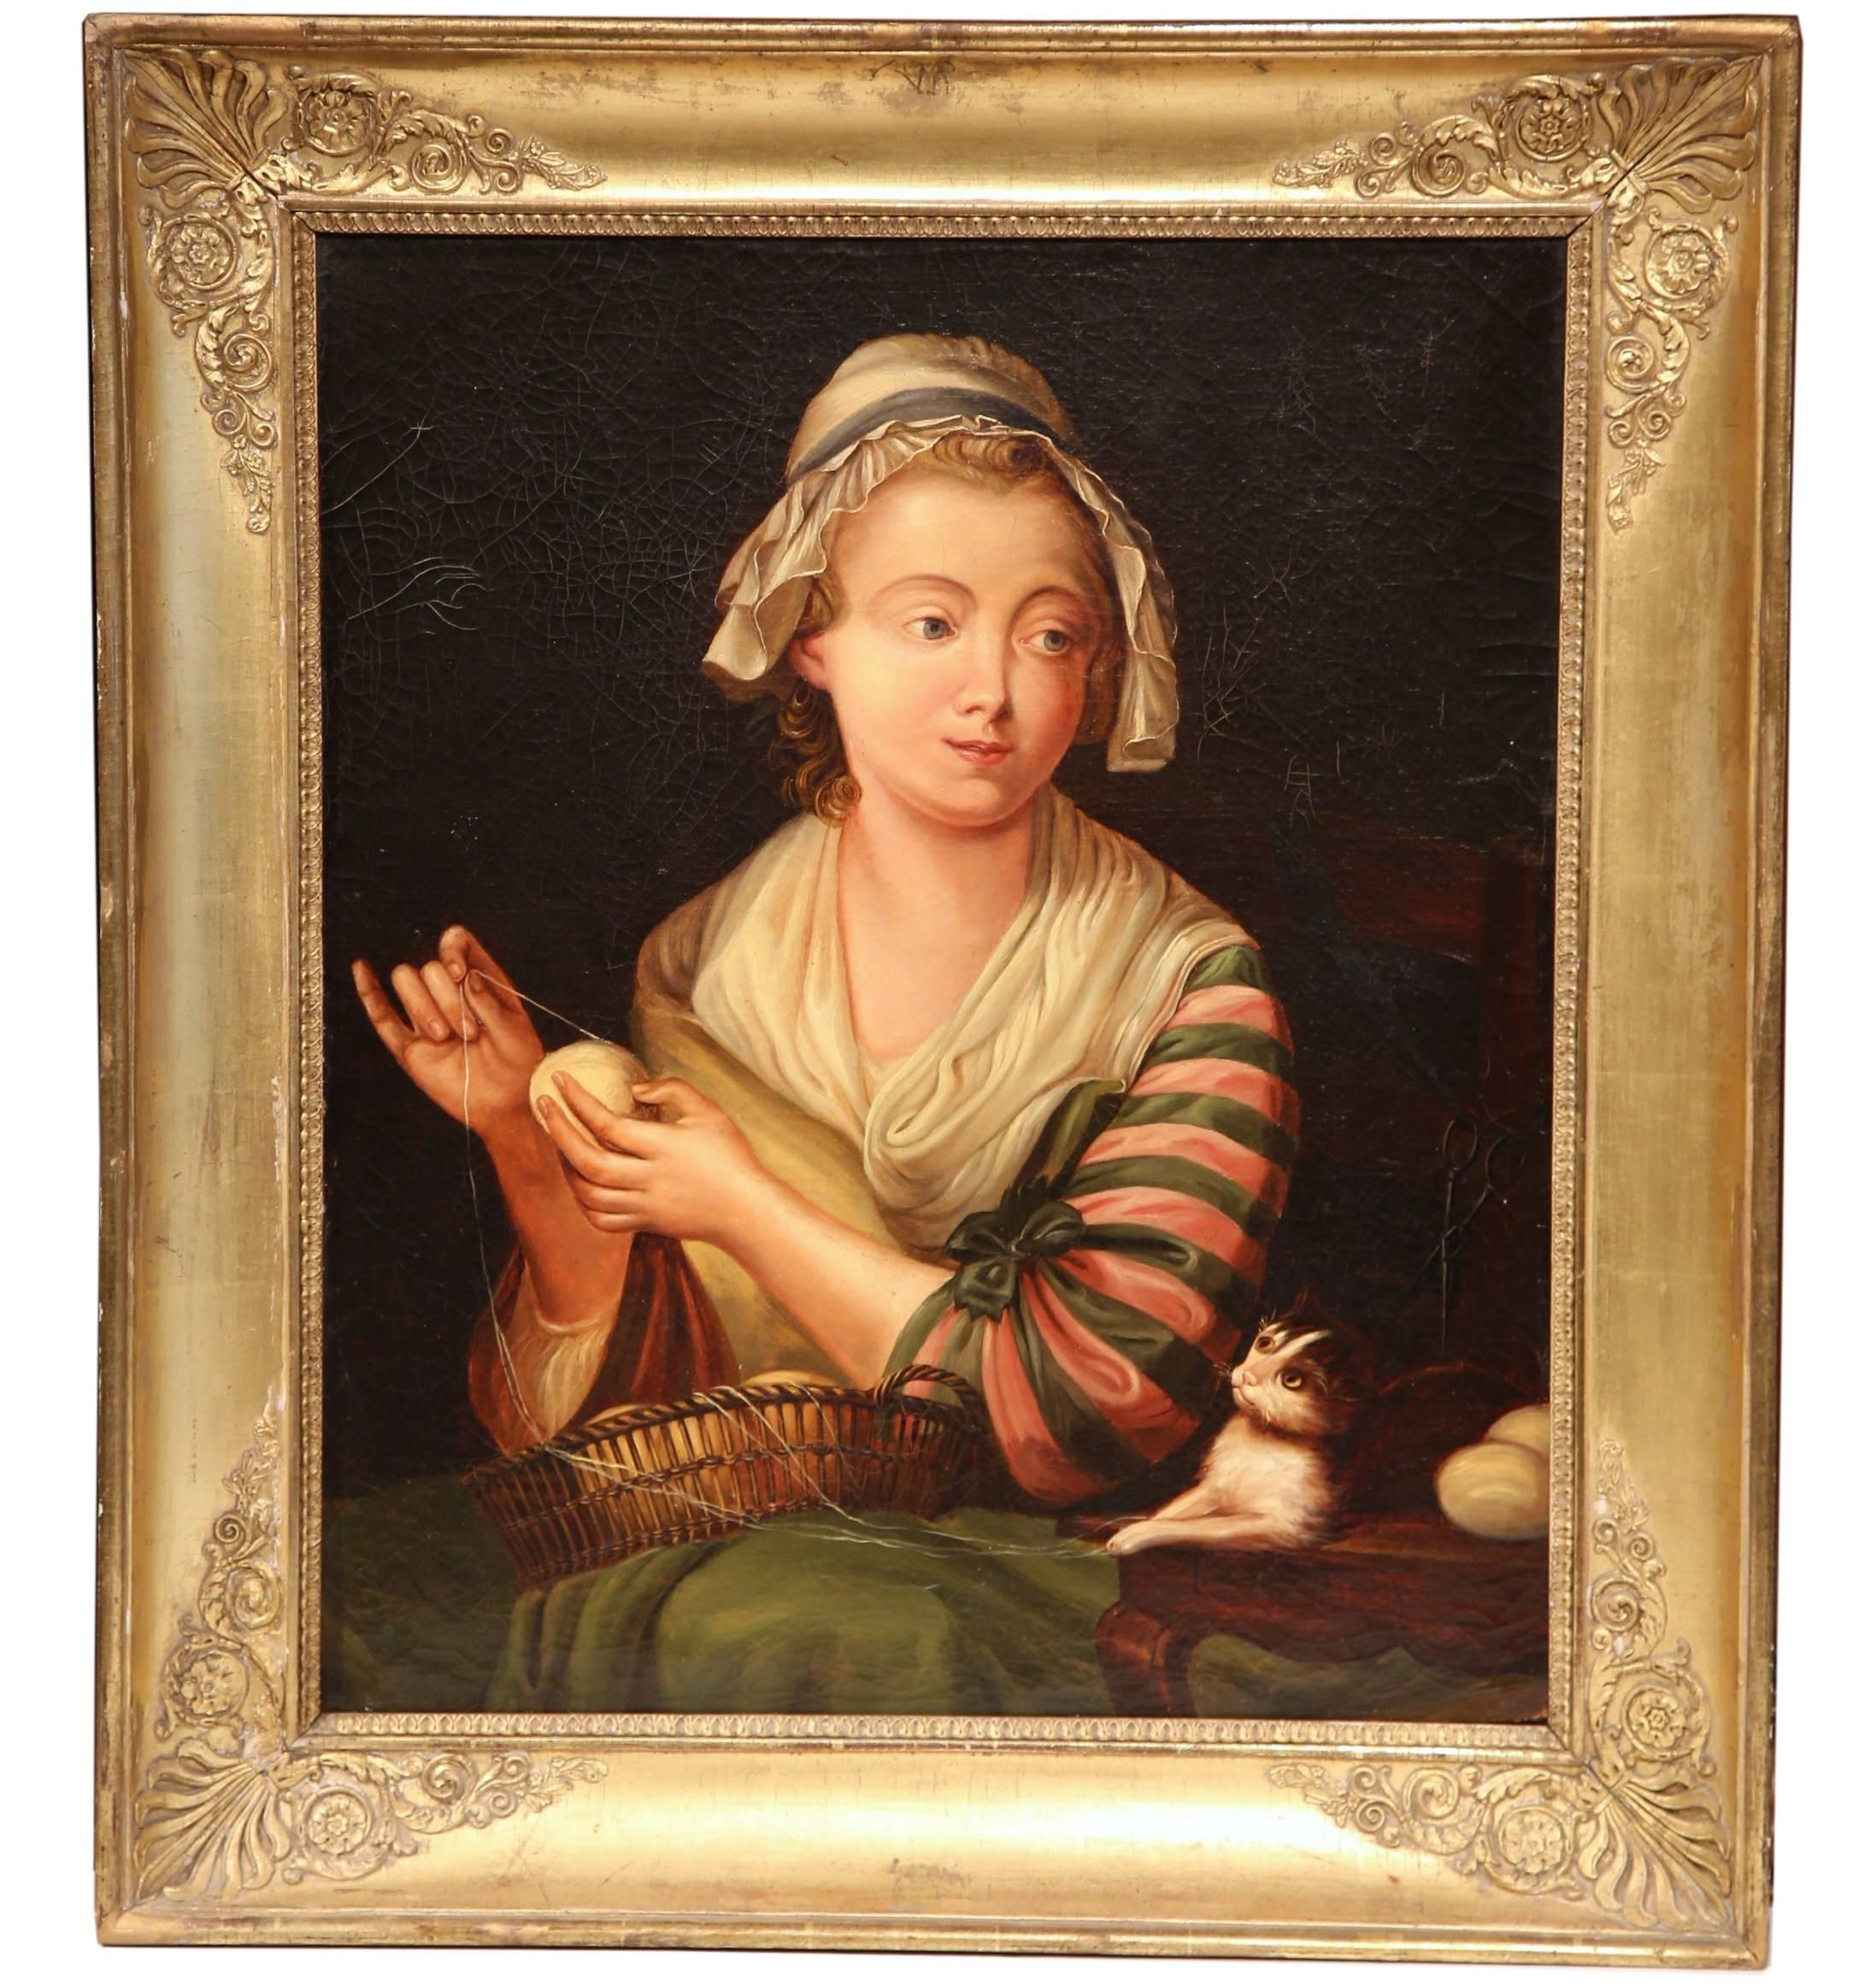 Unknown Portrait Painting - 19th Century French Oil on Canvas Portrait in Gilt Frame